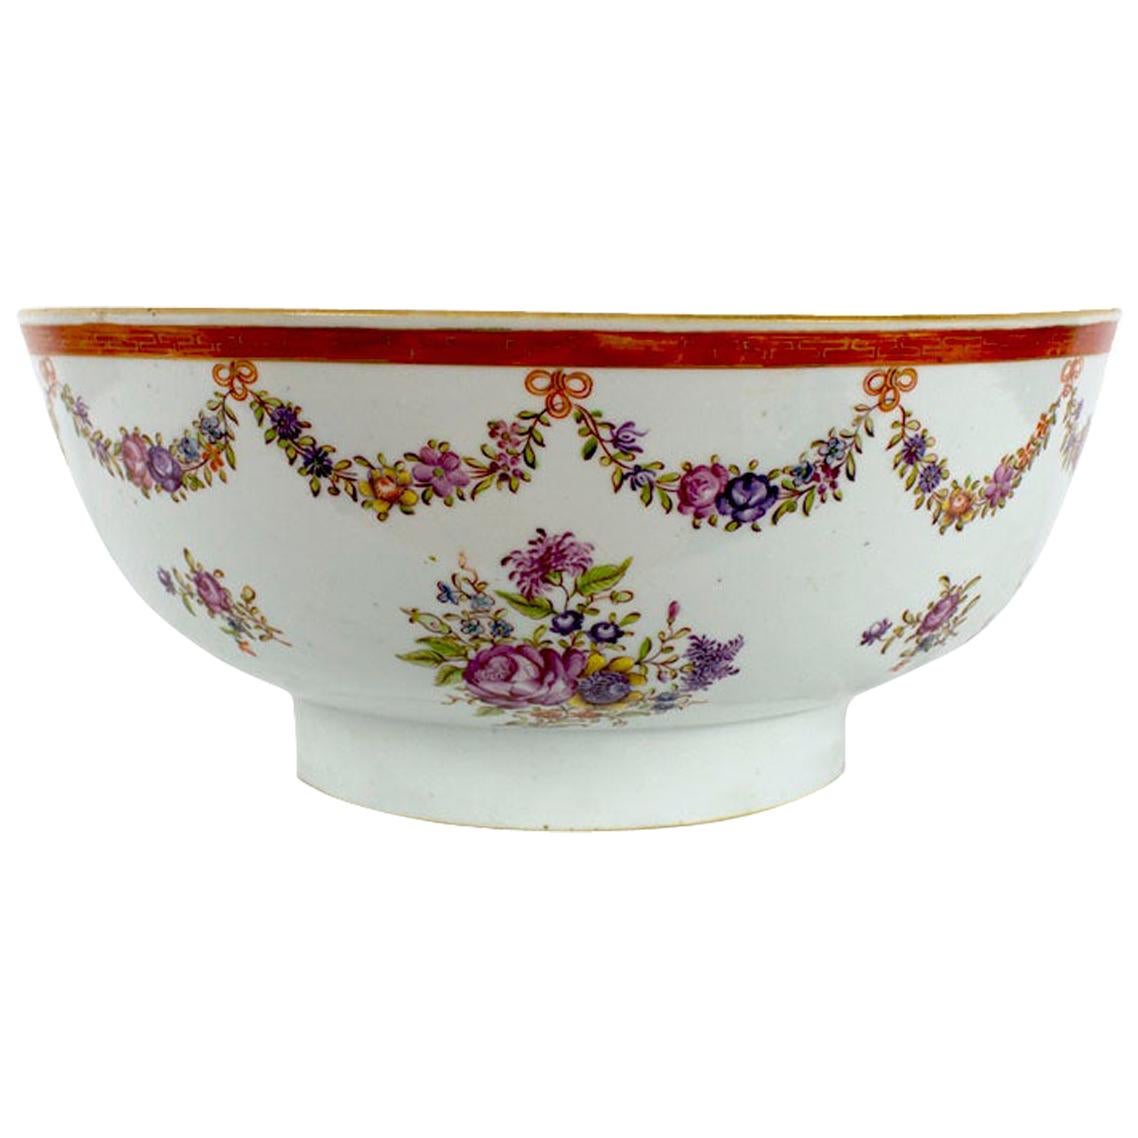 Chinese Export Porcelain Rounded Bowl, Qianlong, ‘1736-1795’ For Sale